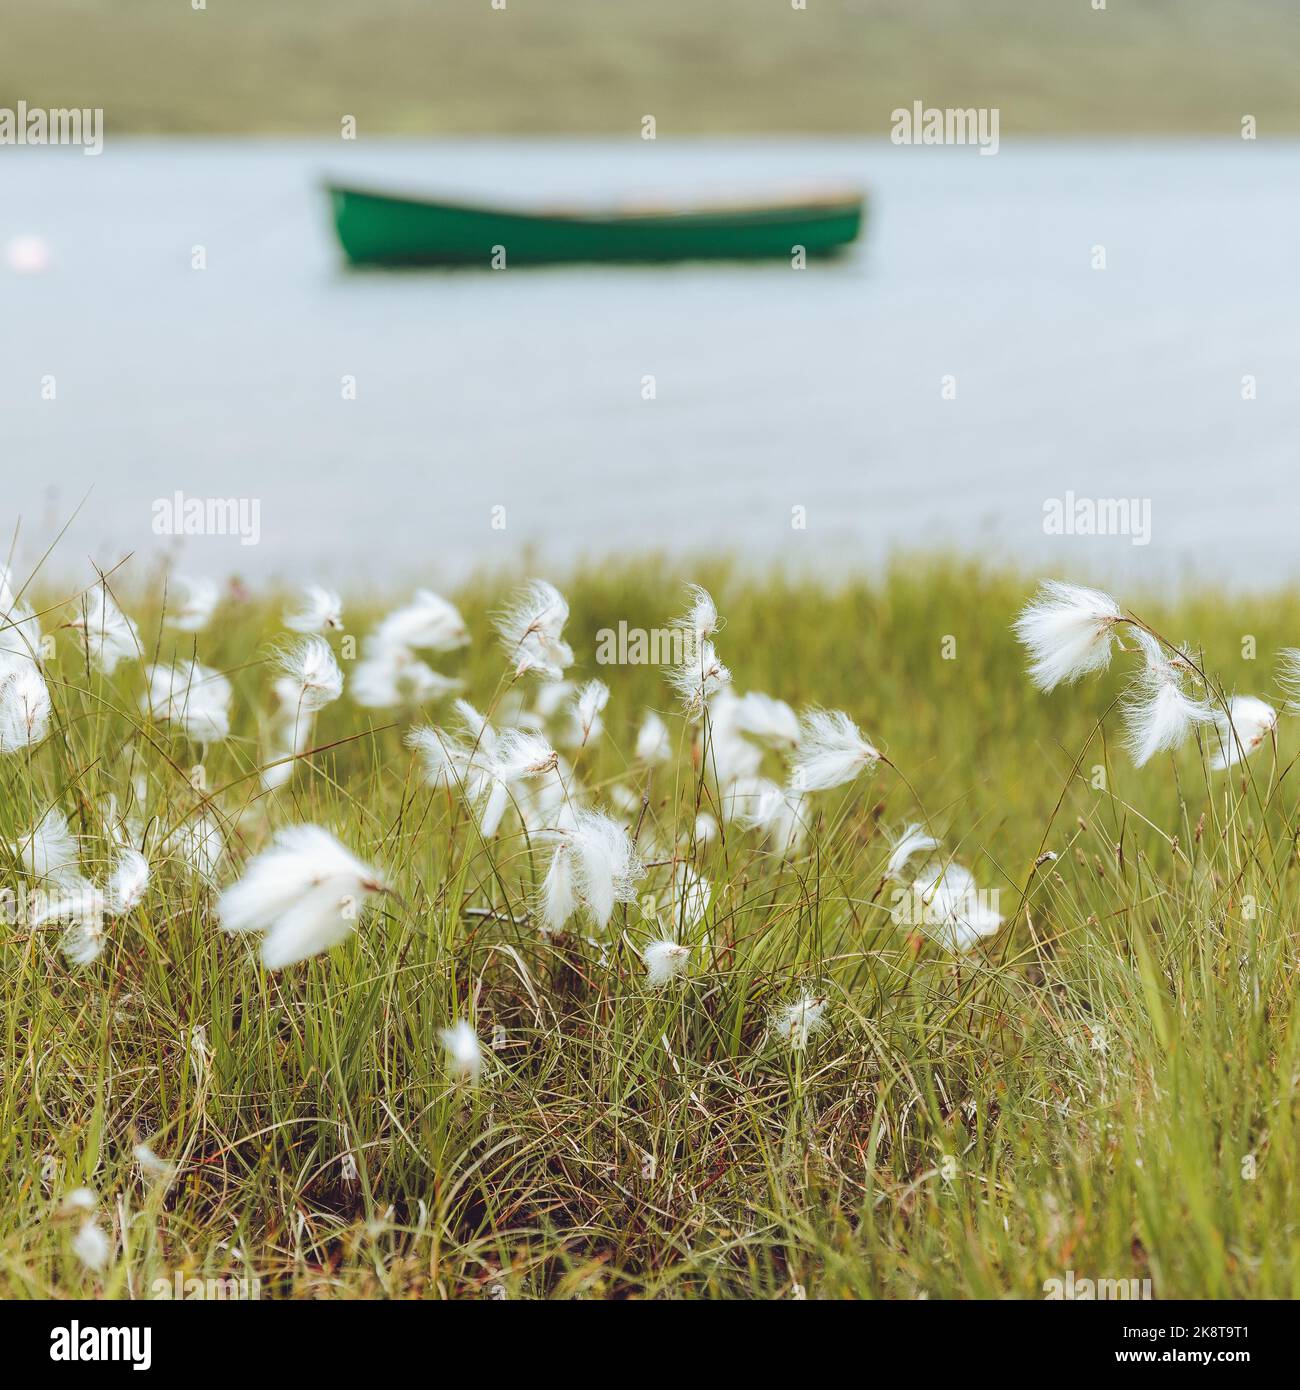 The Eriophorum gracile plant with water and a green boat in the background. Stock Photo